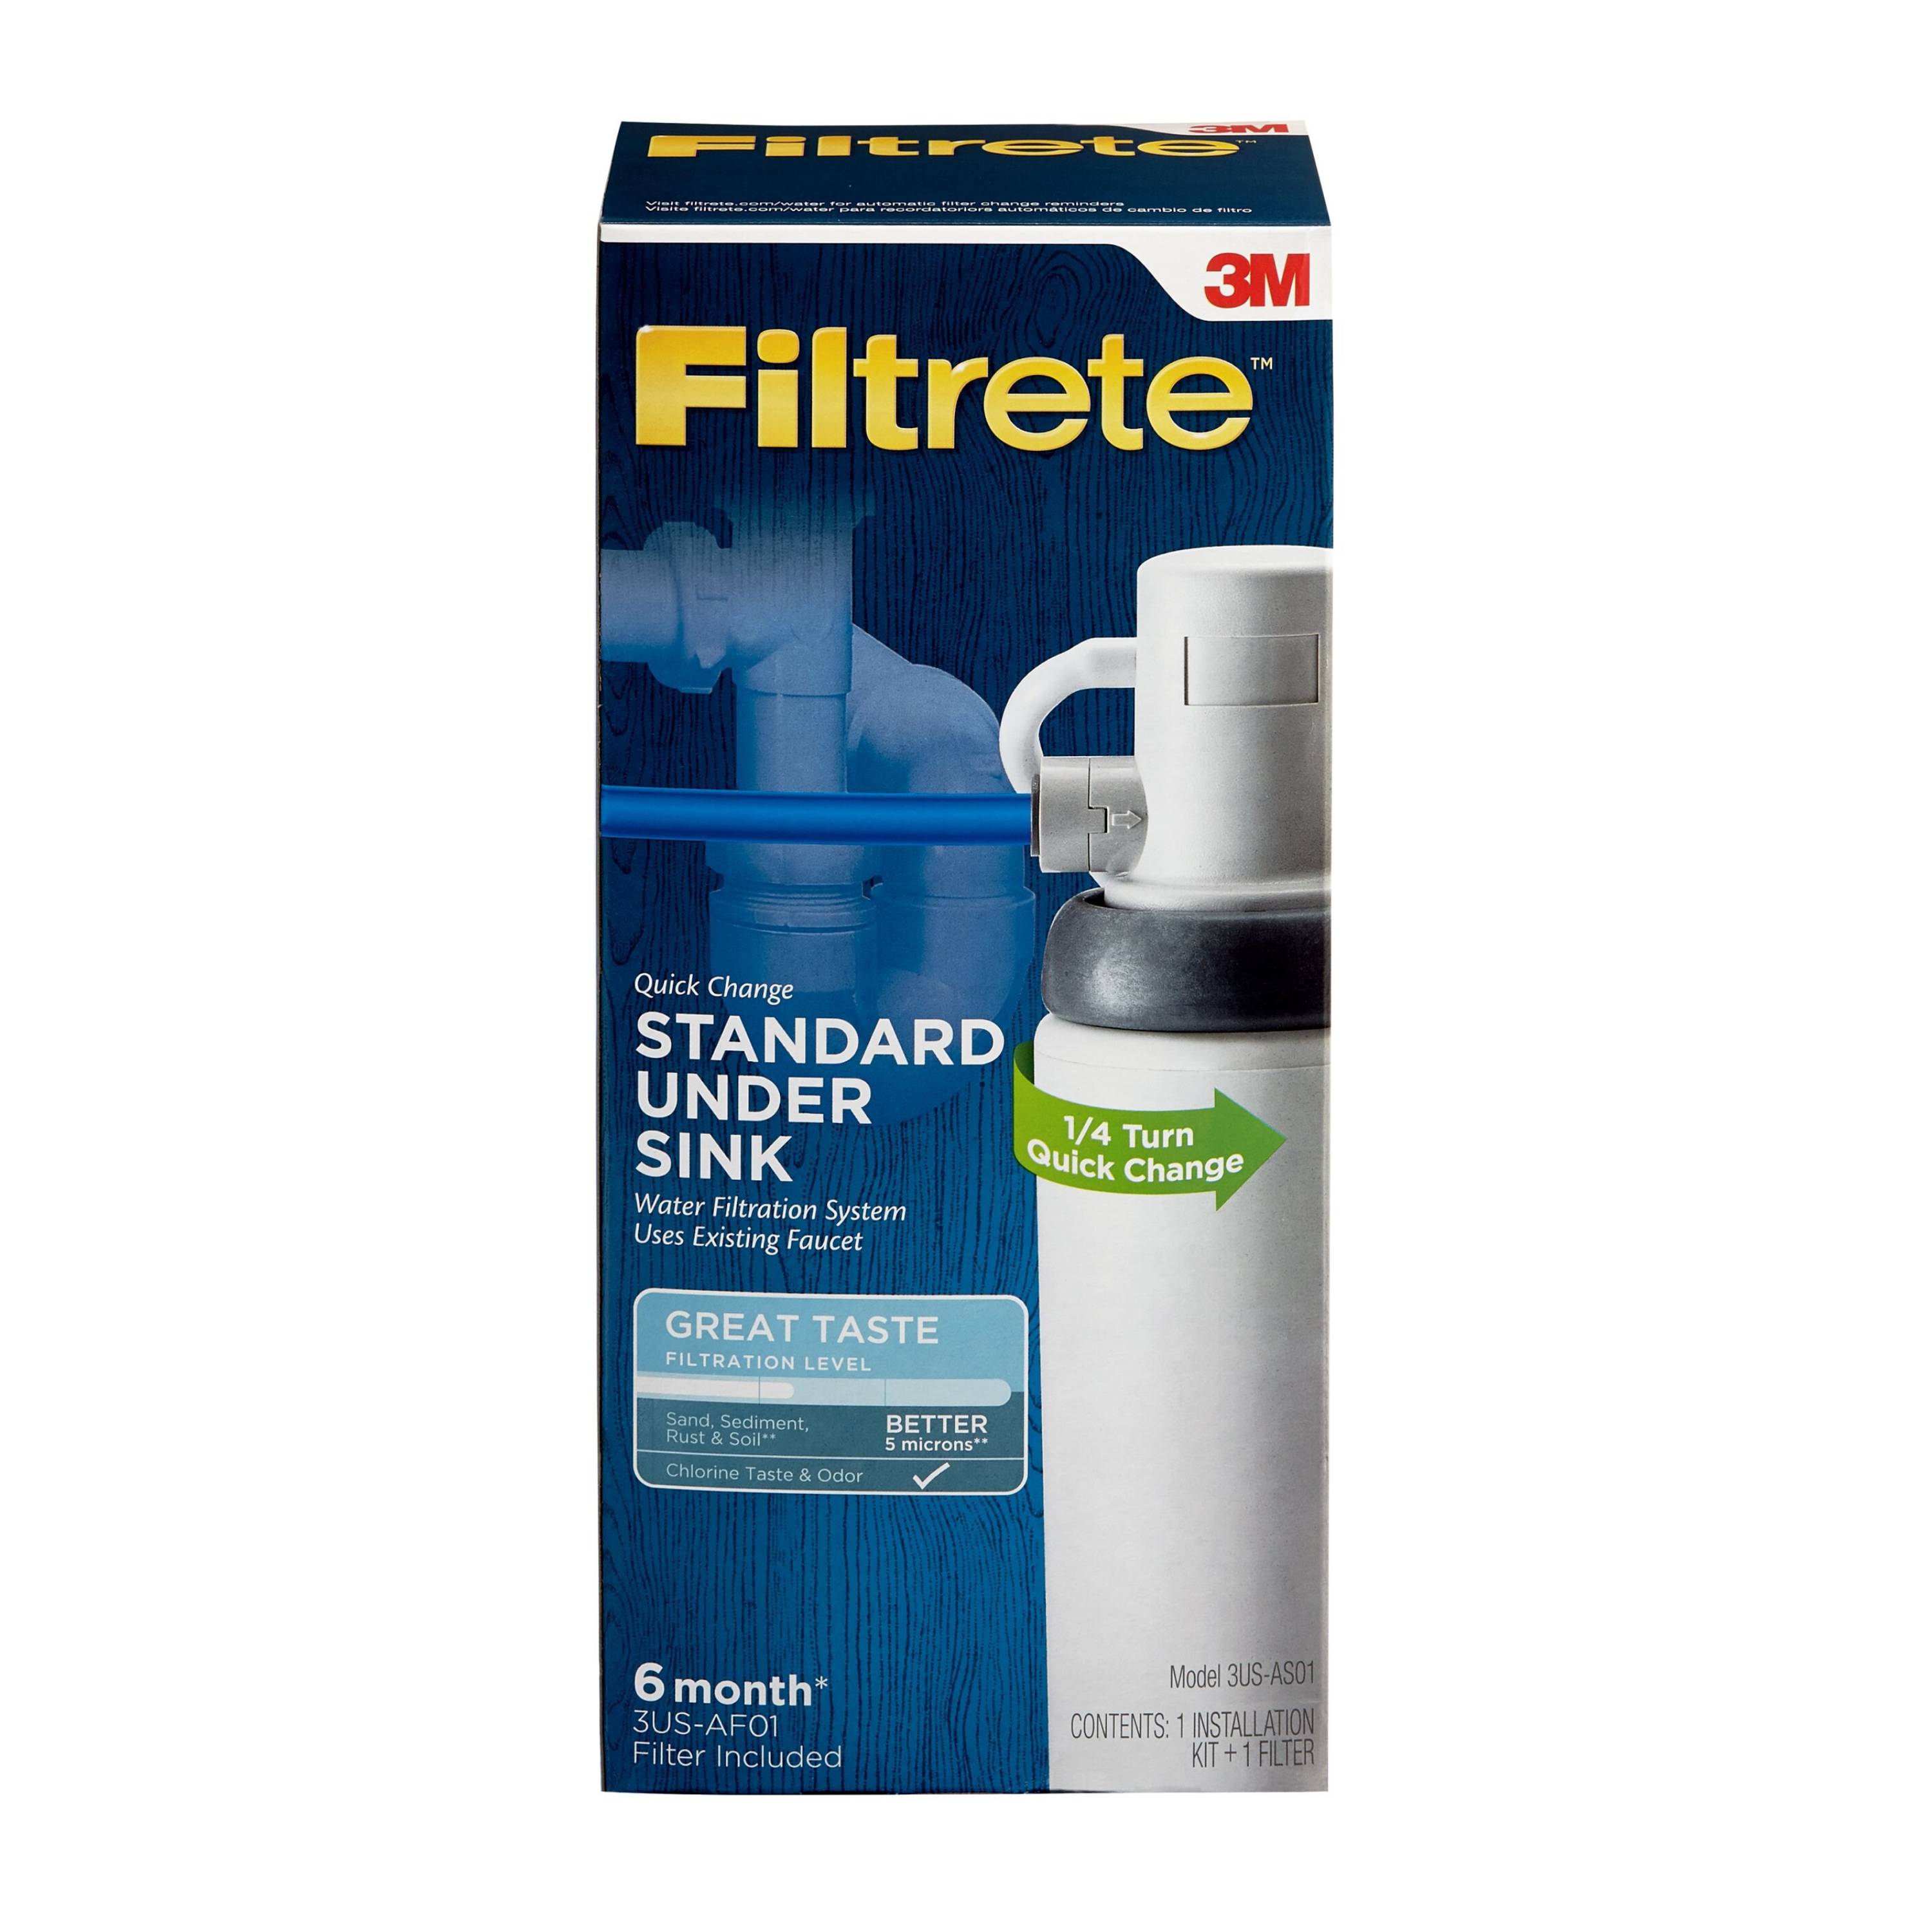 3M Filtrete 3US-AS01 Quick Change Under Sink Water Filtration System